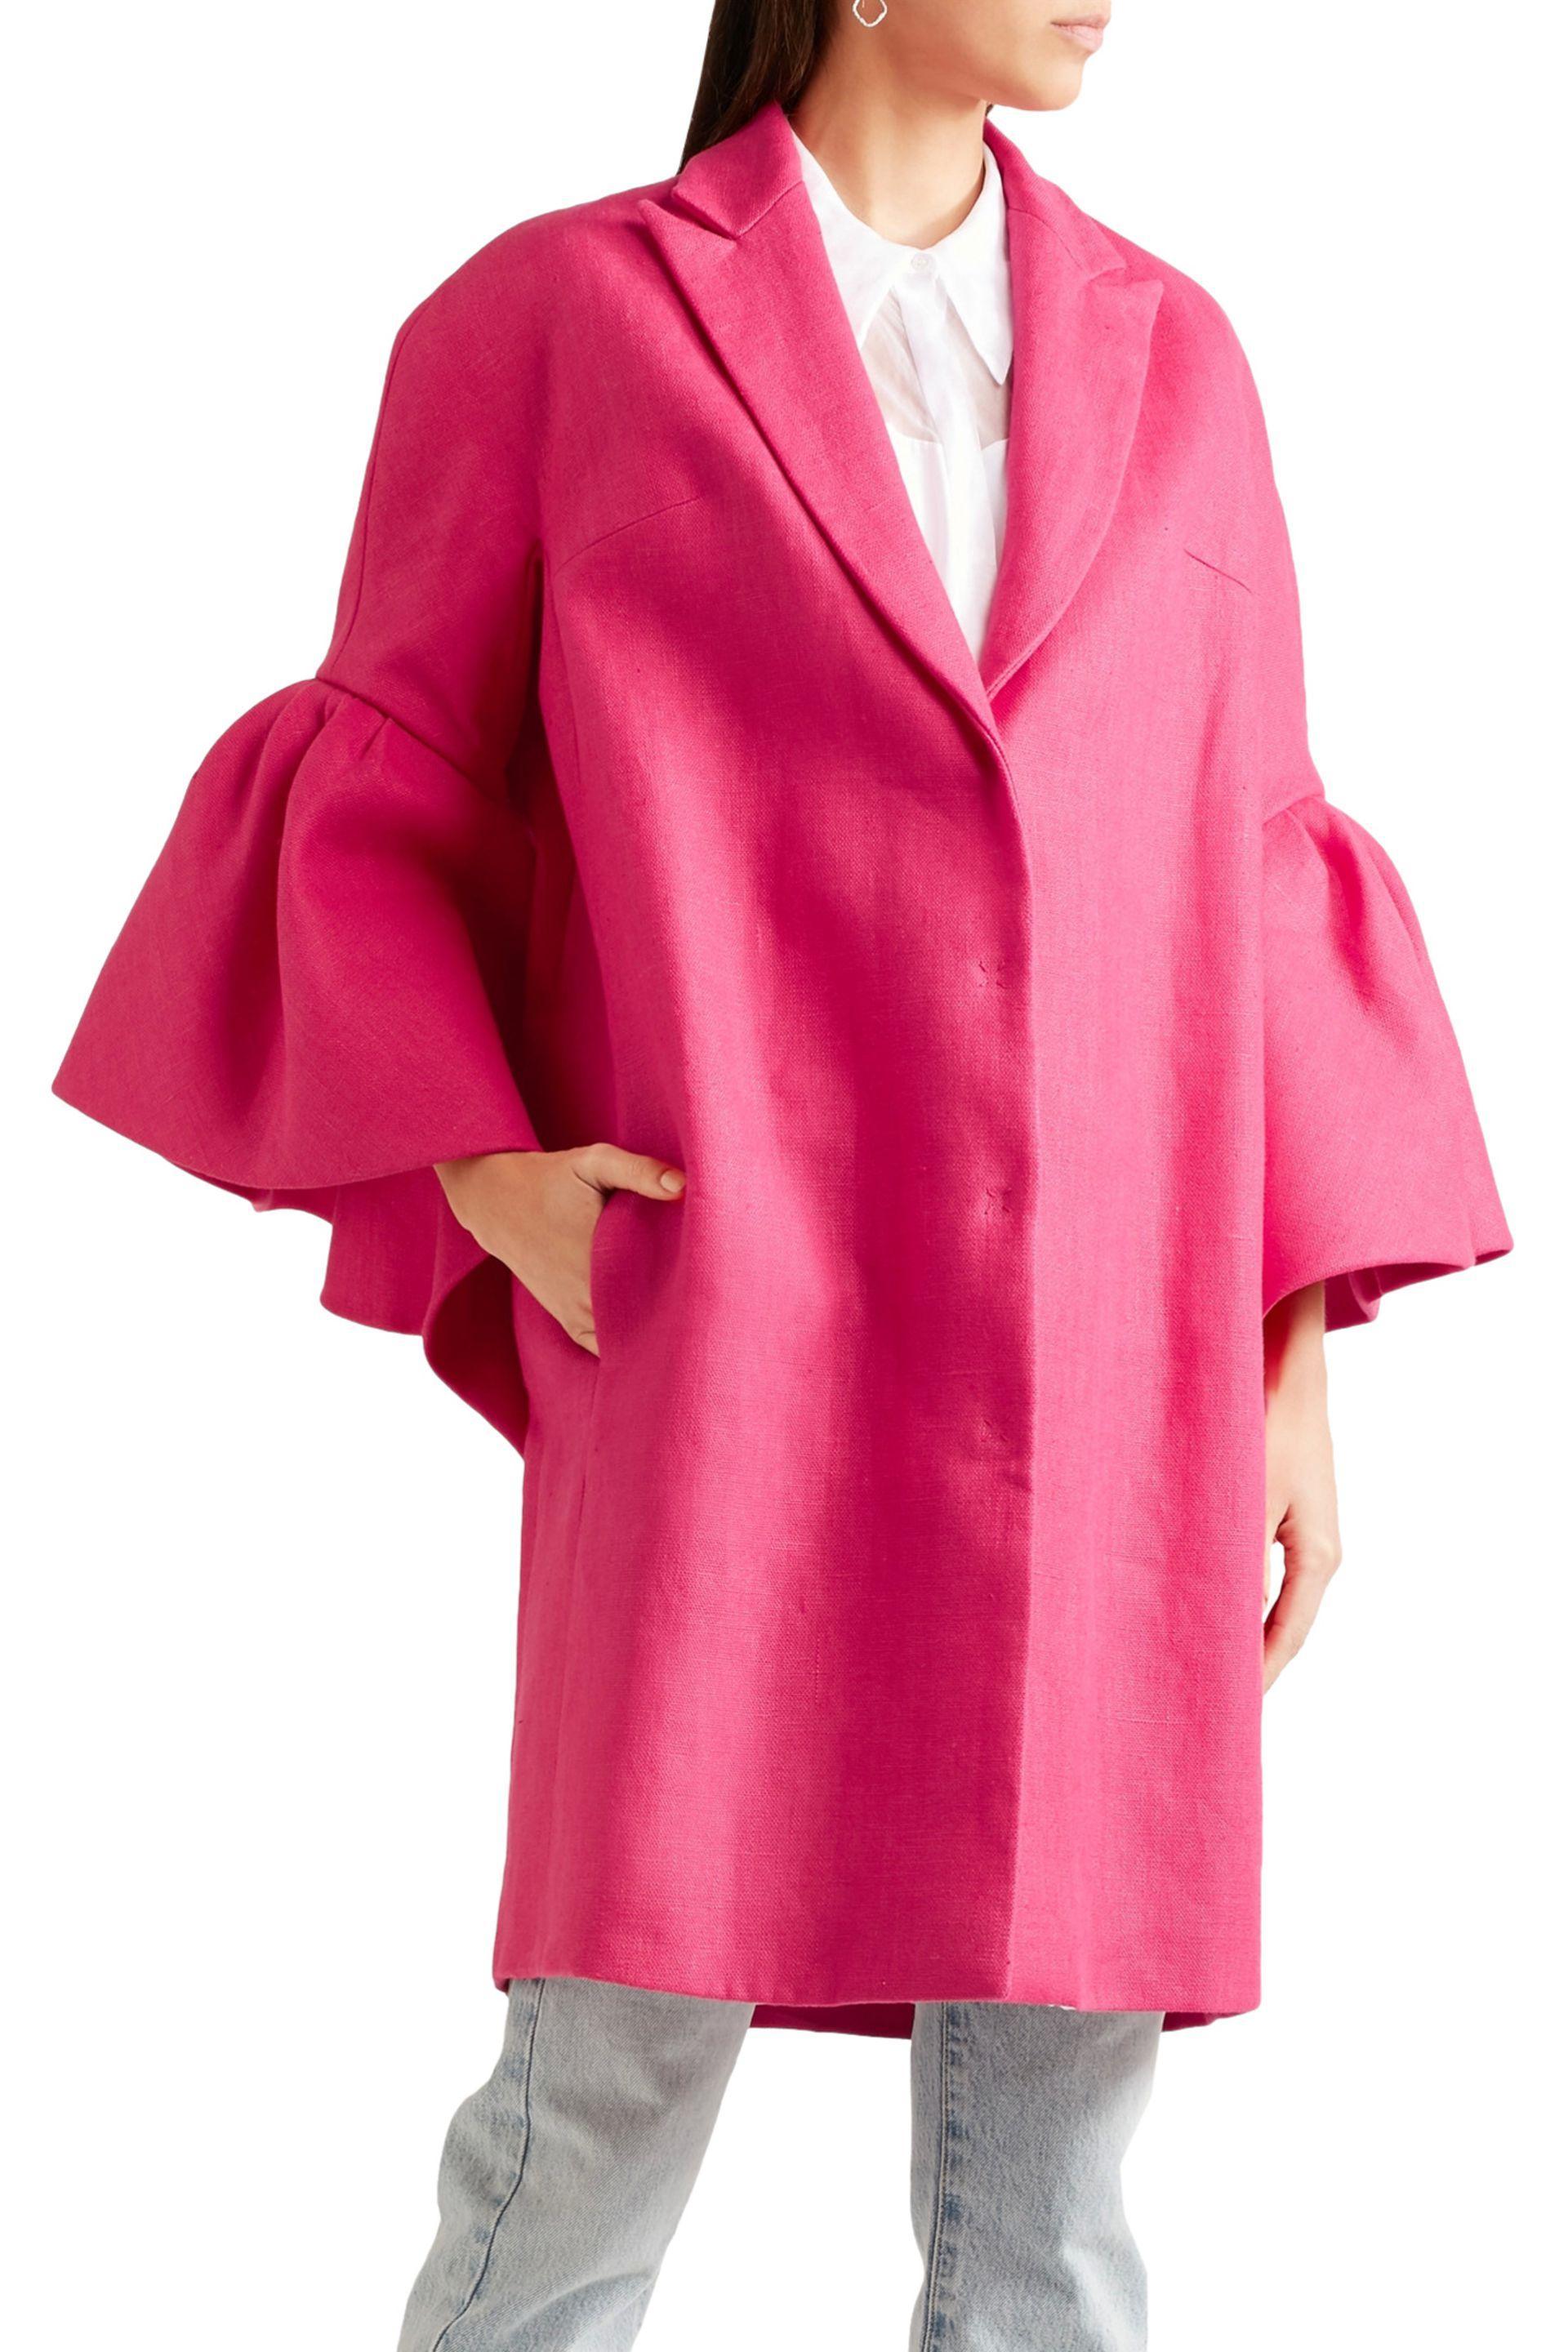 Delpozo Fuschia Linen Coat

Made In: Spain
Color: Fuschia
Materials: 100% Linen
Lining: 100% Cotton
Opening/Closure: Snap
Overall Condition: Excellent with a few small stains to lining
Estimated Retail: $2,650

Tag Size: FR38 *Please refer to